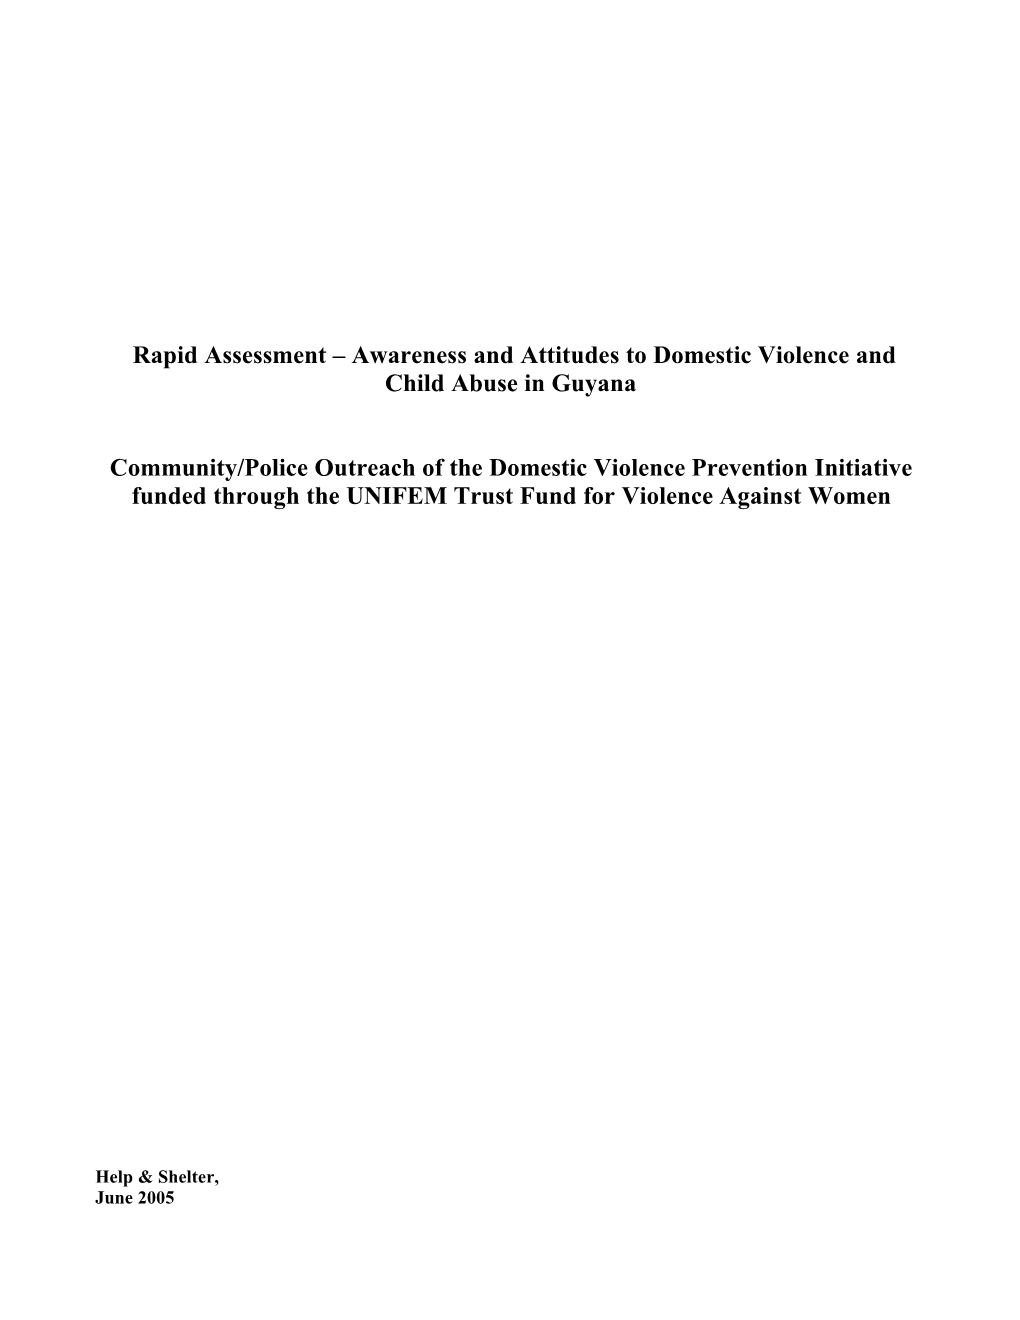 Rapid Assessment – Awareness and Attitudes to Domestic Violence and Child Abuse in Guyana